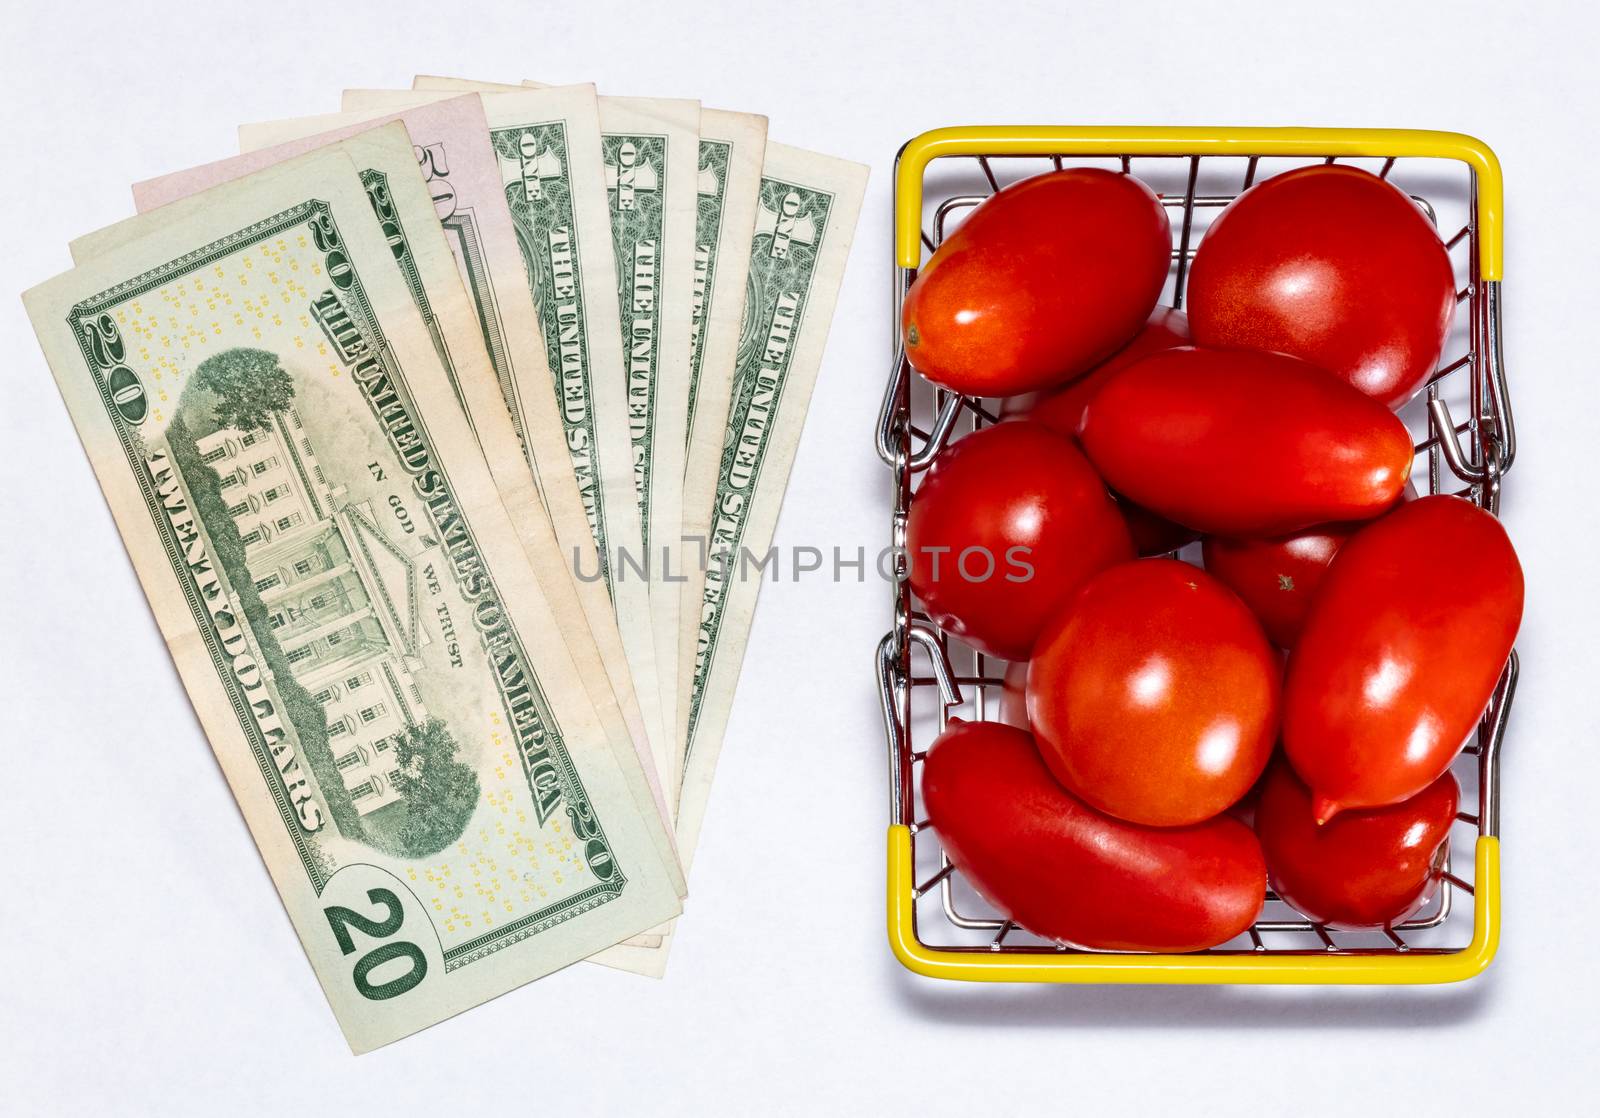 Shot of tomatoes in shopping basket isolated on white background with various US dollar bills next to it. Ripe tasty red tomatos in shopping basket. Top view. Copy space. by DamantisZ